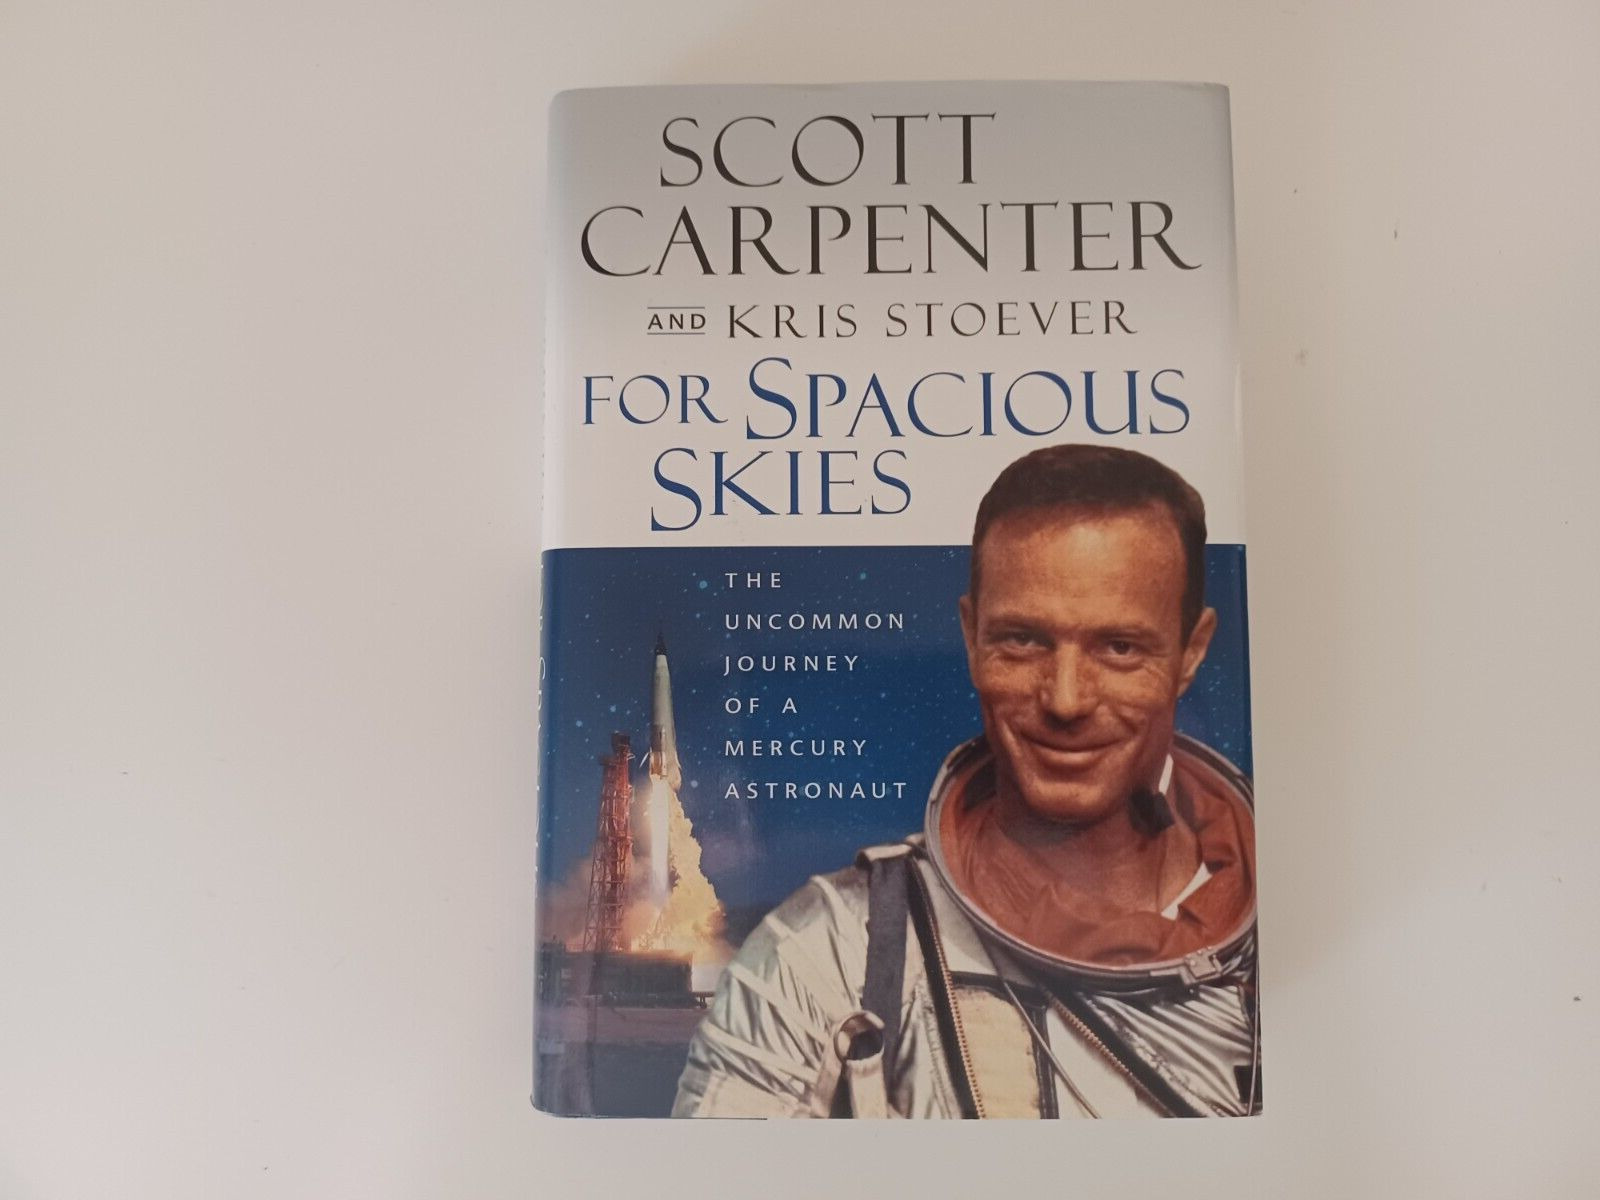 FOR SPACIOUS SKIES, FIRST ED., SCOTT CARPENTER AND KRIS STOEVER- SIGNED BY BOTH